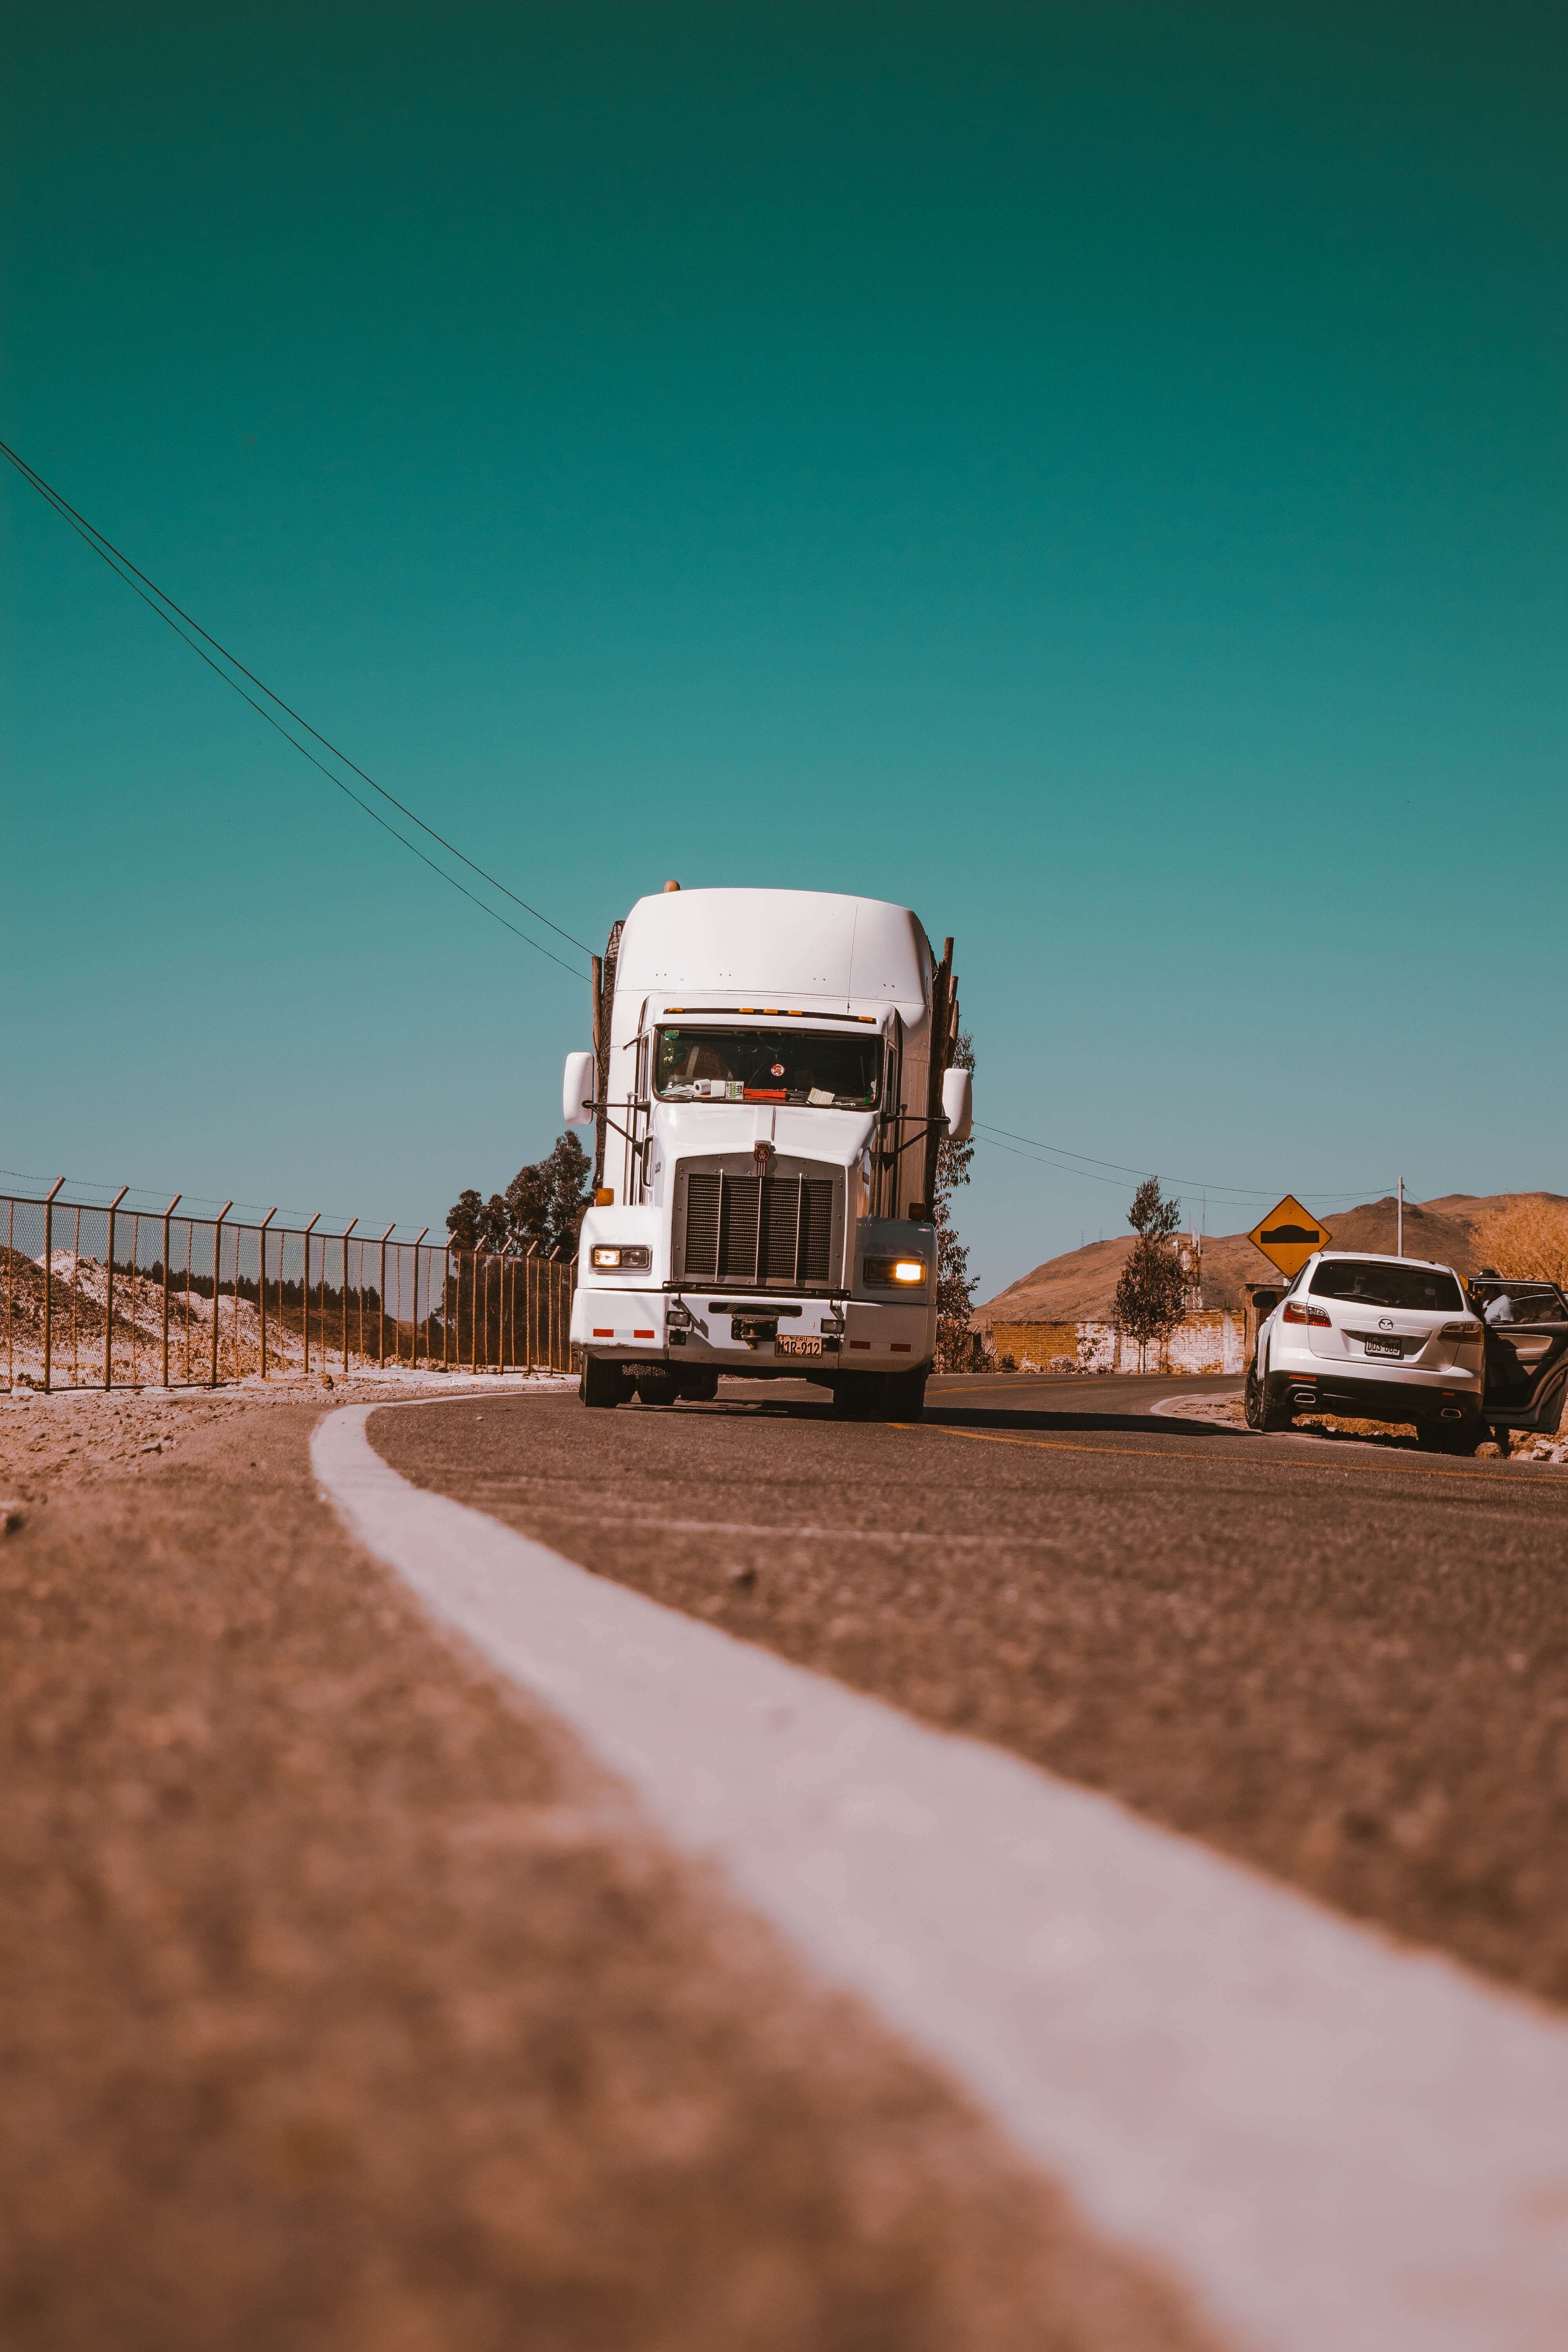 What Makes a Truck Accident in South Carolina So Dangerous?